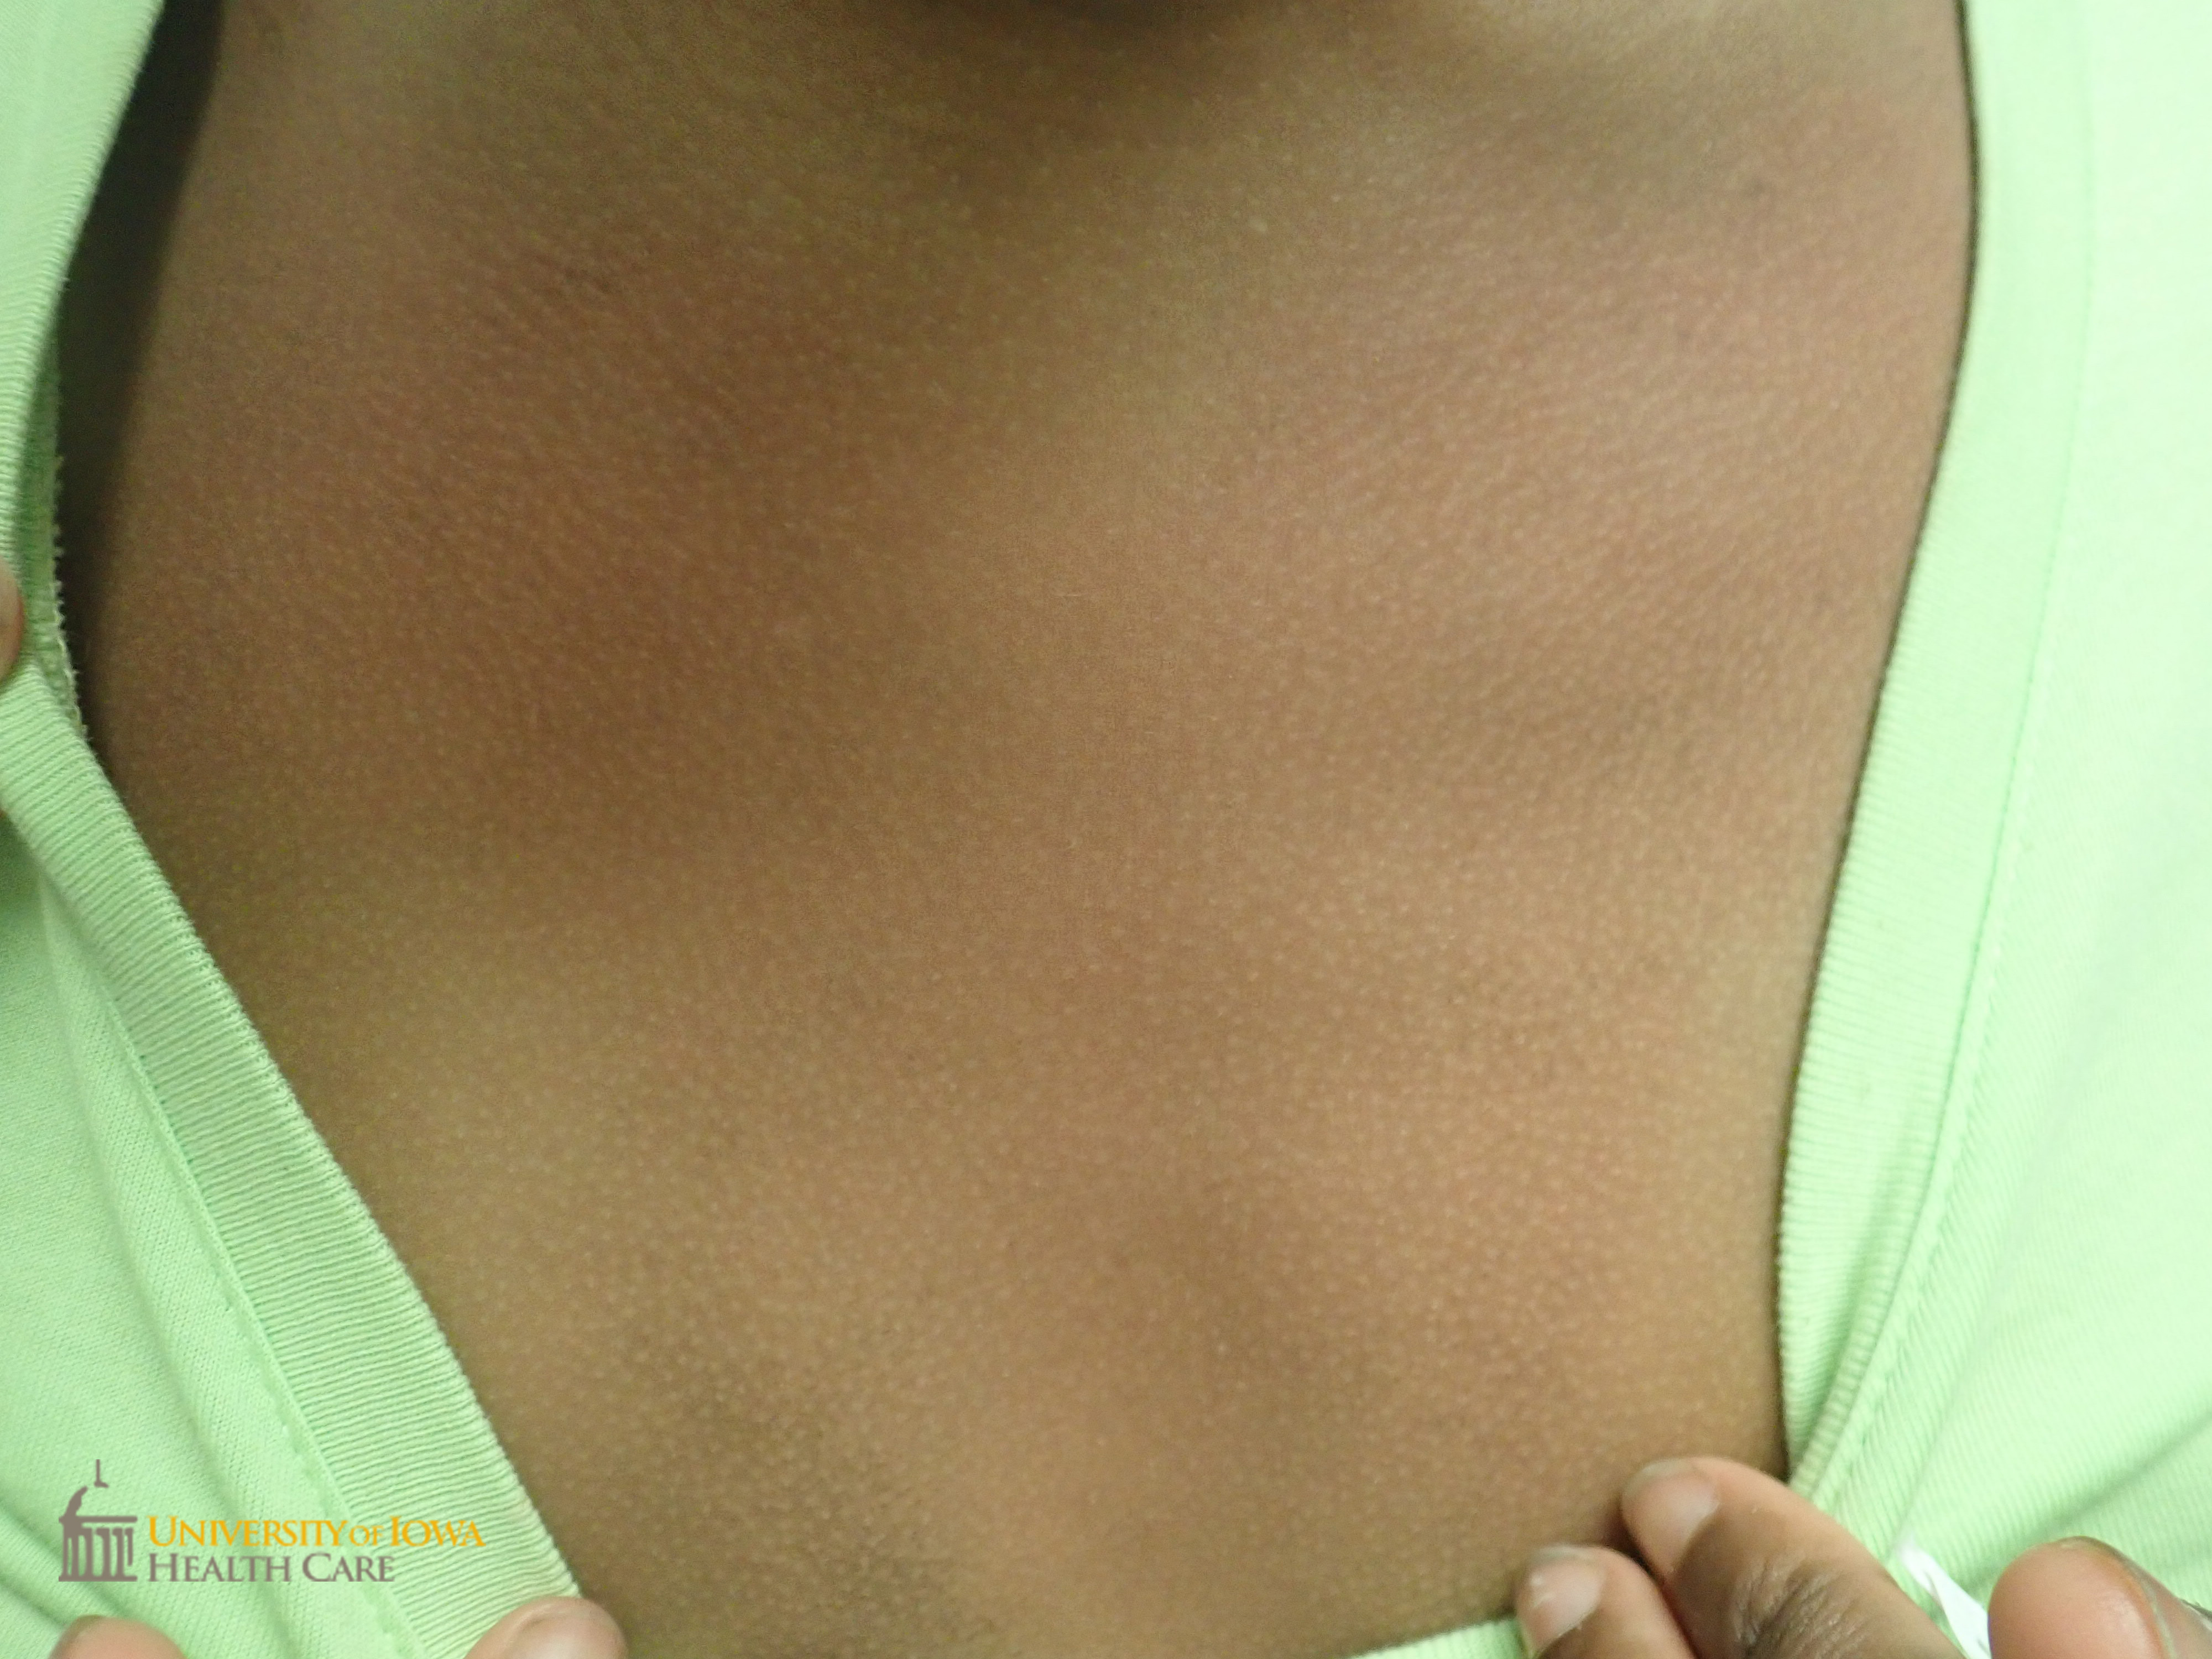 Resolution of brown patch after alcohol swab. (click images for higher resolution).